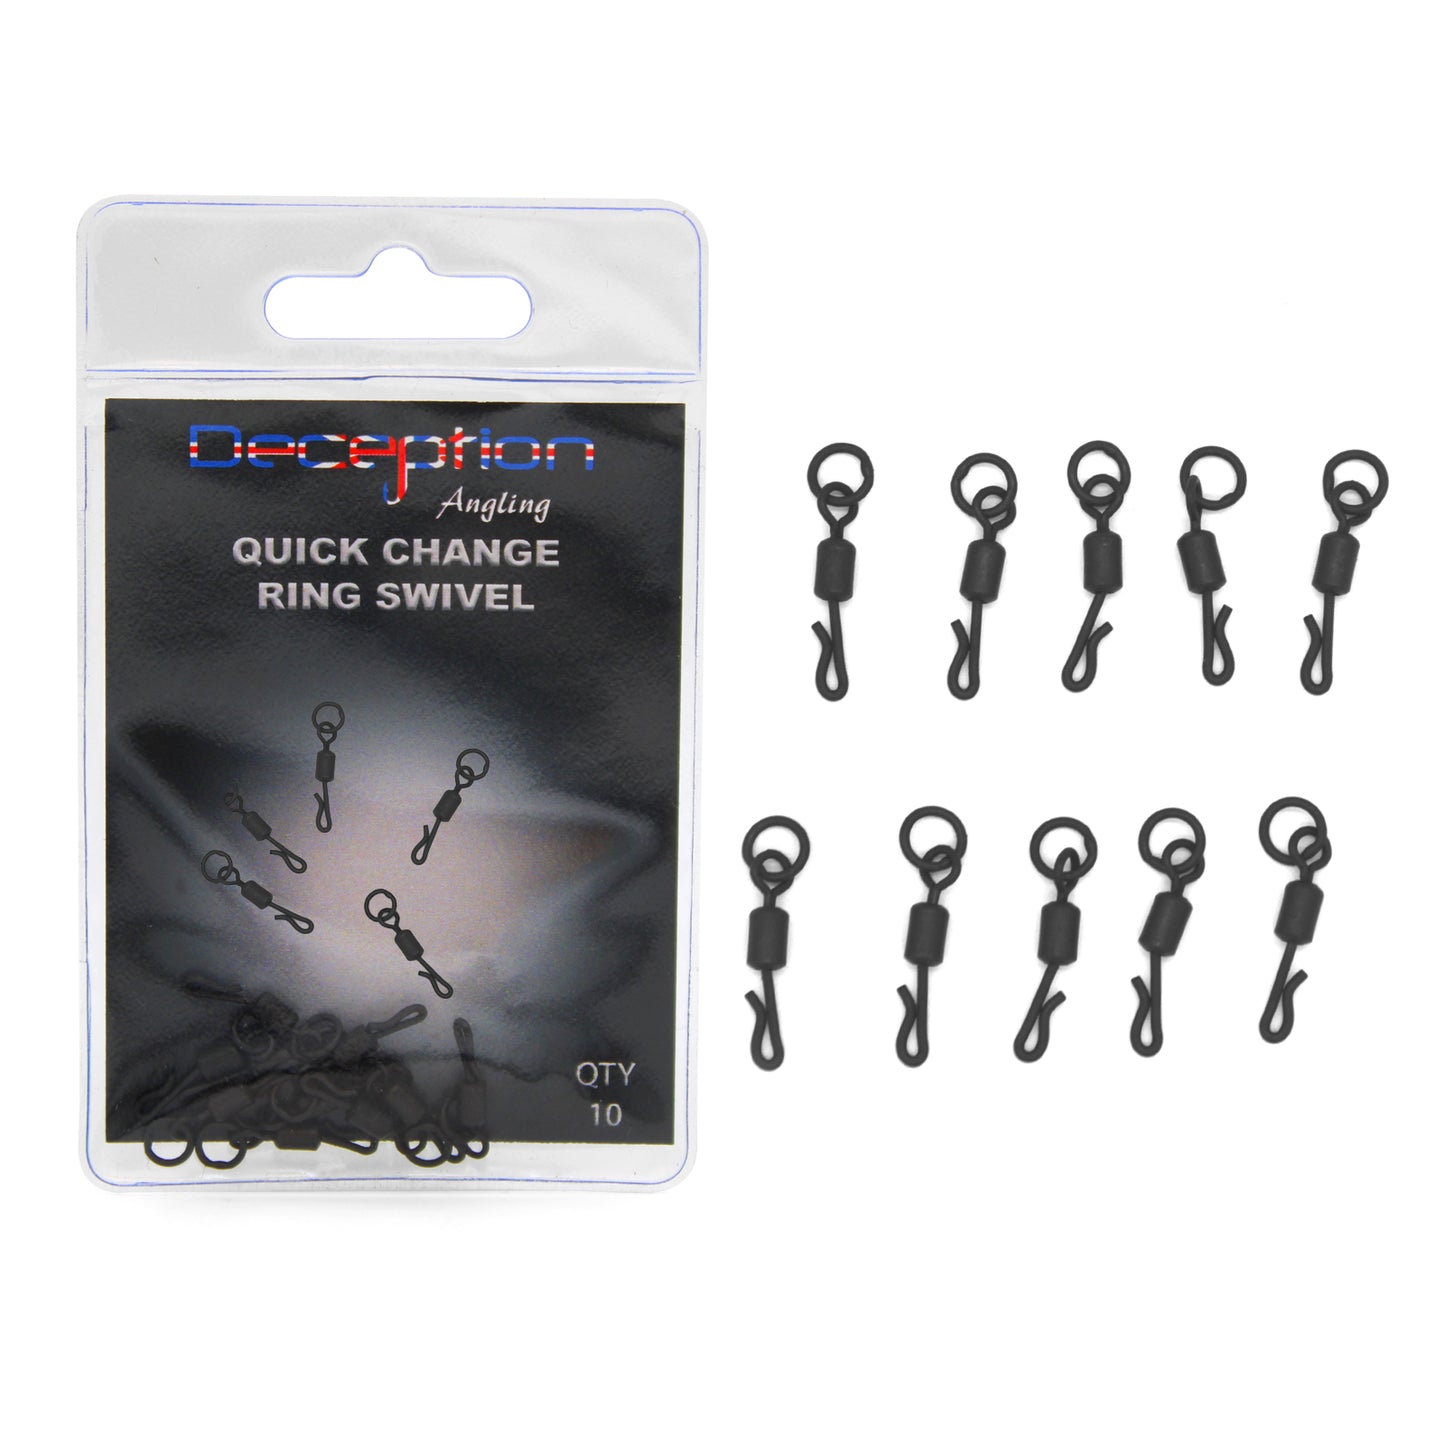 Deception Angling Quick Change Ring Swivels for Fishing - Pack of 10